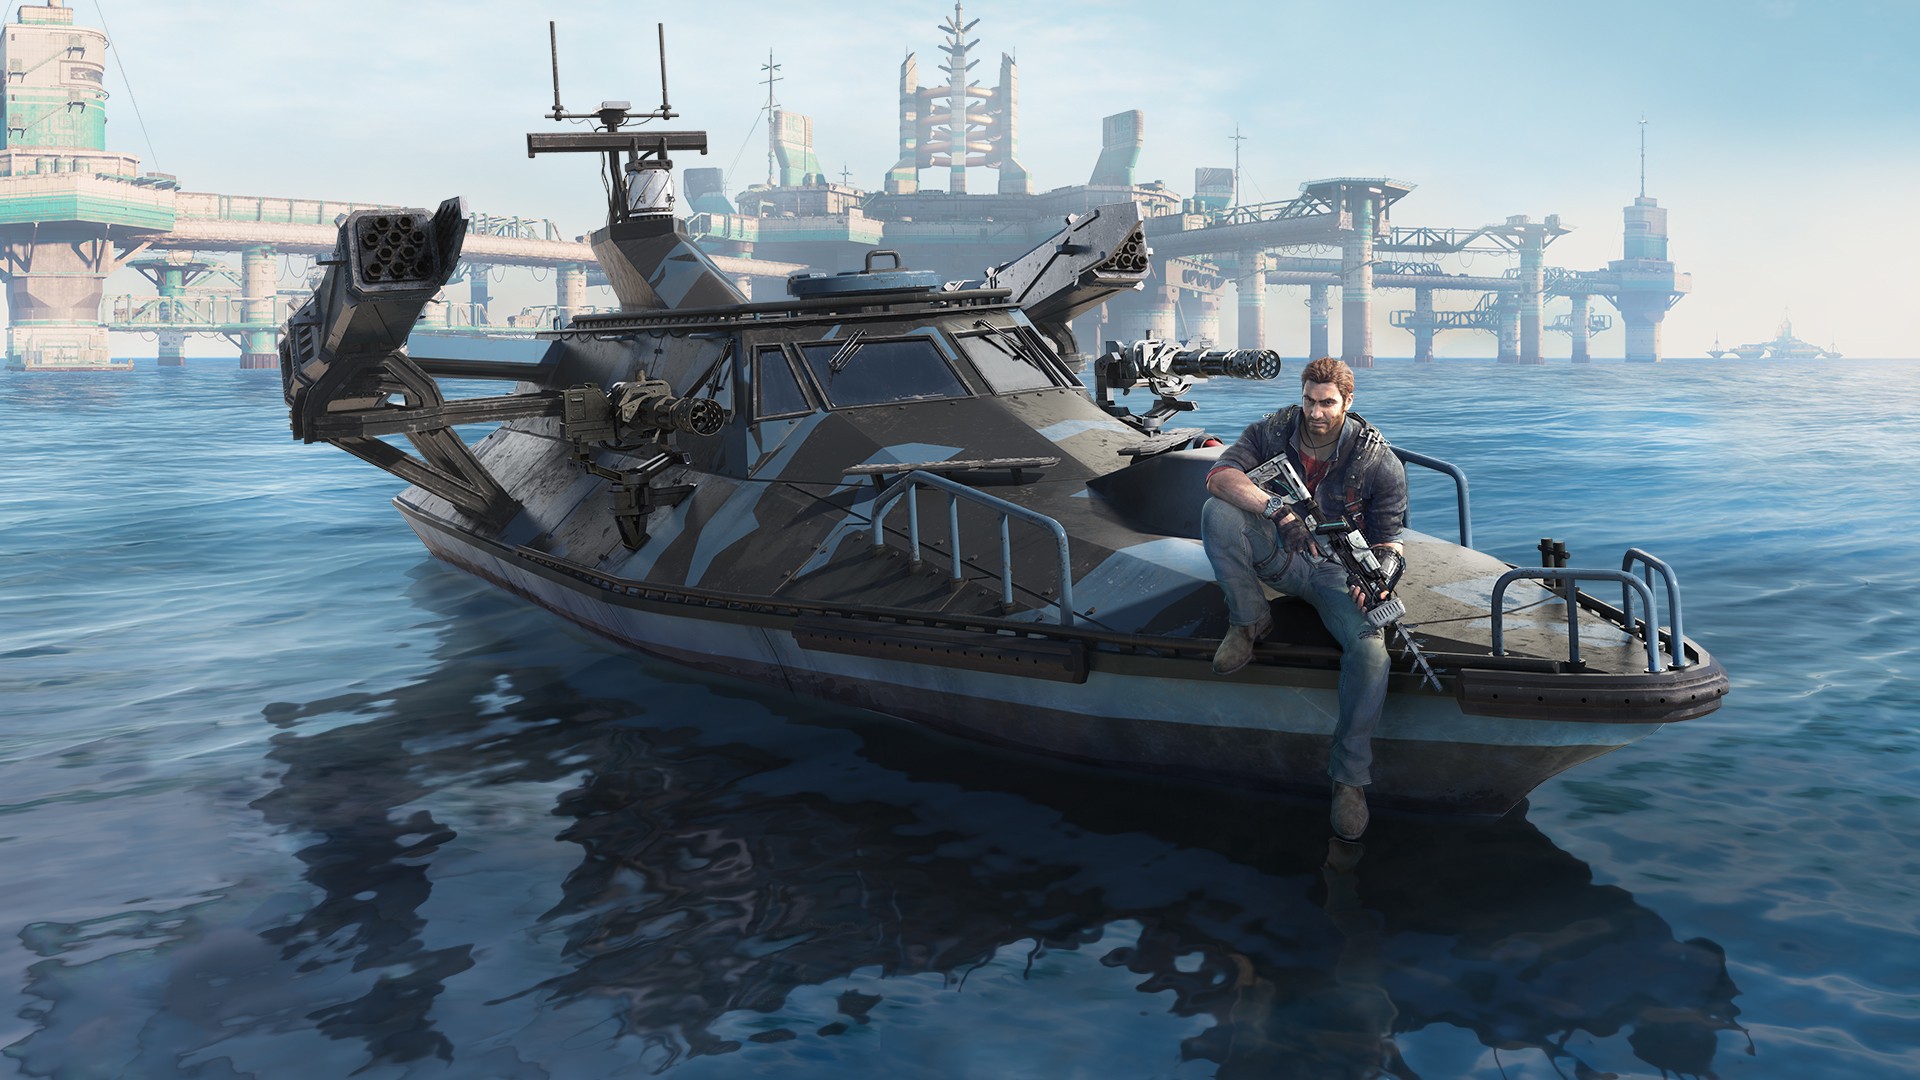 Video Games Just Cause 3 Boat Vehicle Rico Rodriguez 1920x1080